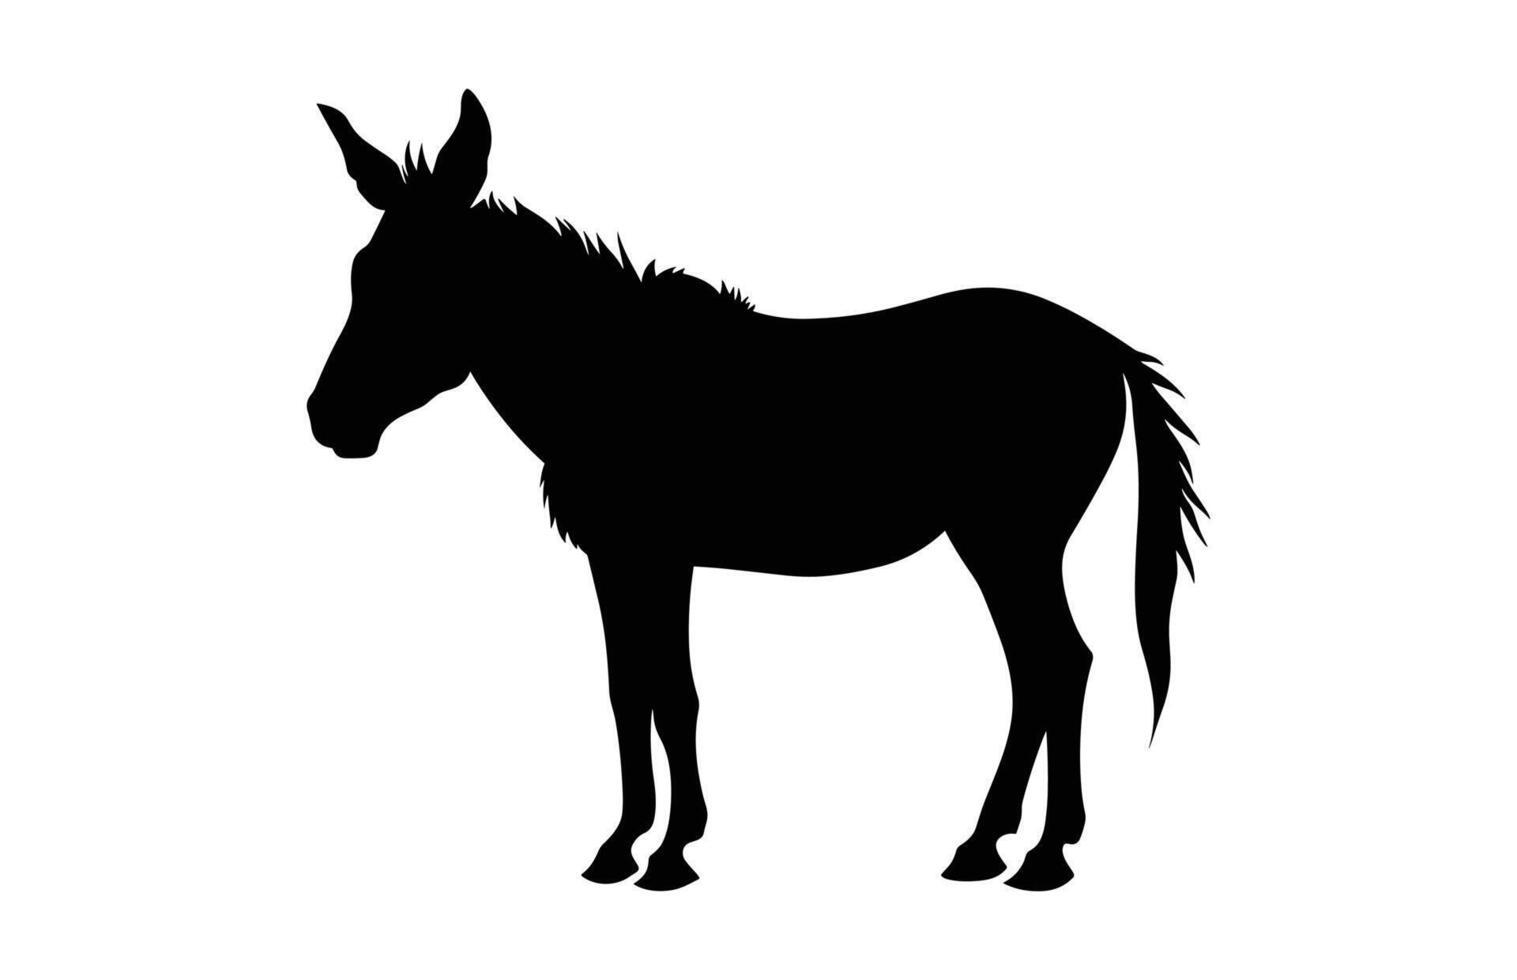 Donkey black Silhouette Vector isolated on a white background